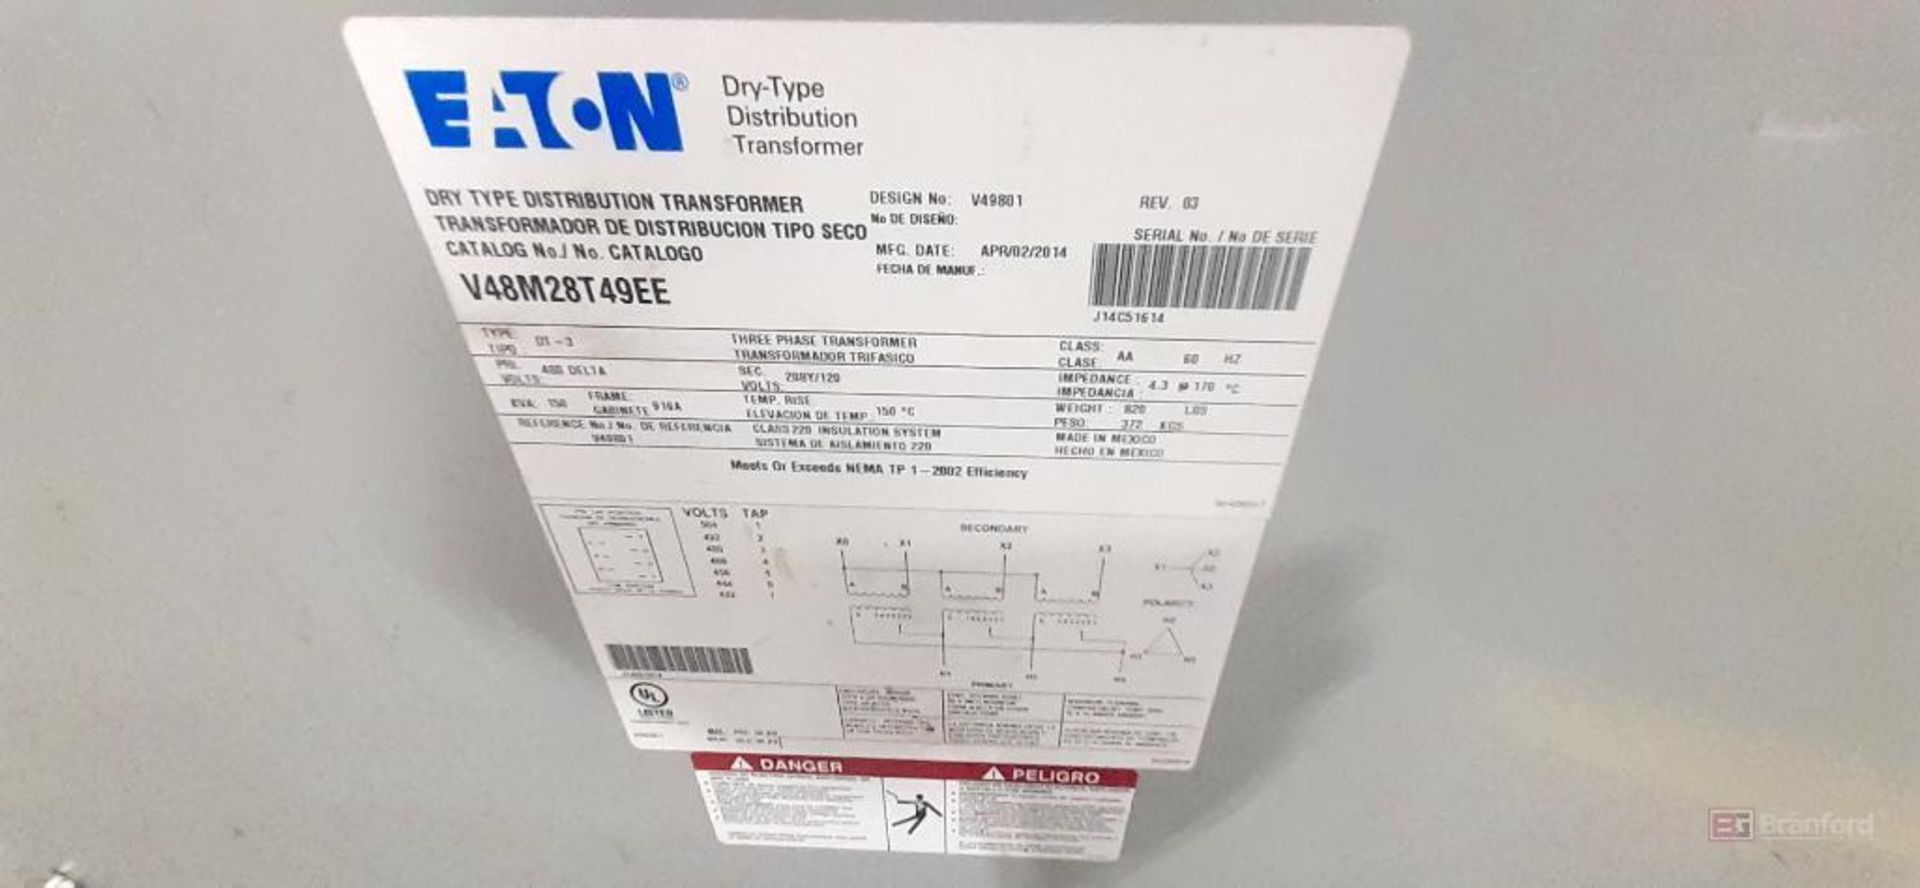 Eaton CAT# V48M28T49EE, Dry Type Low Voltage Distribution Transformer - Image 2 of 3